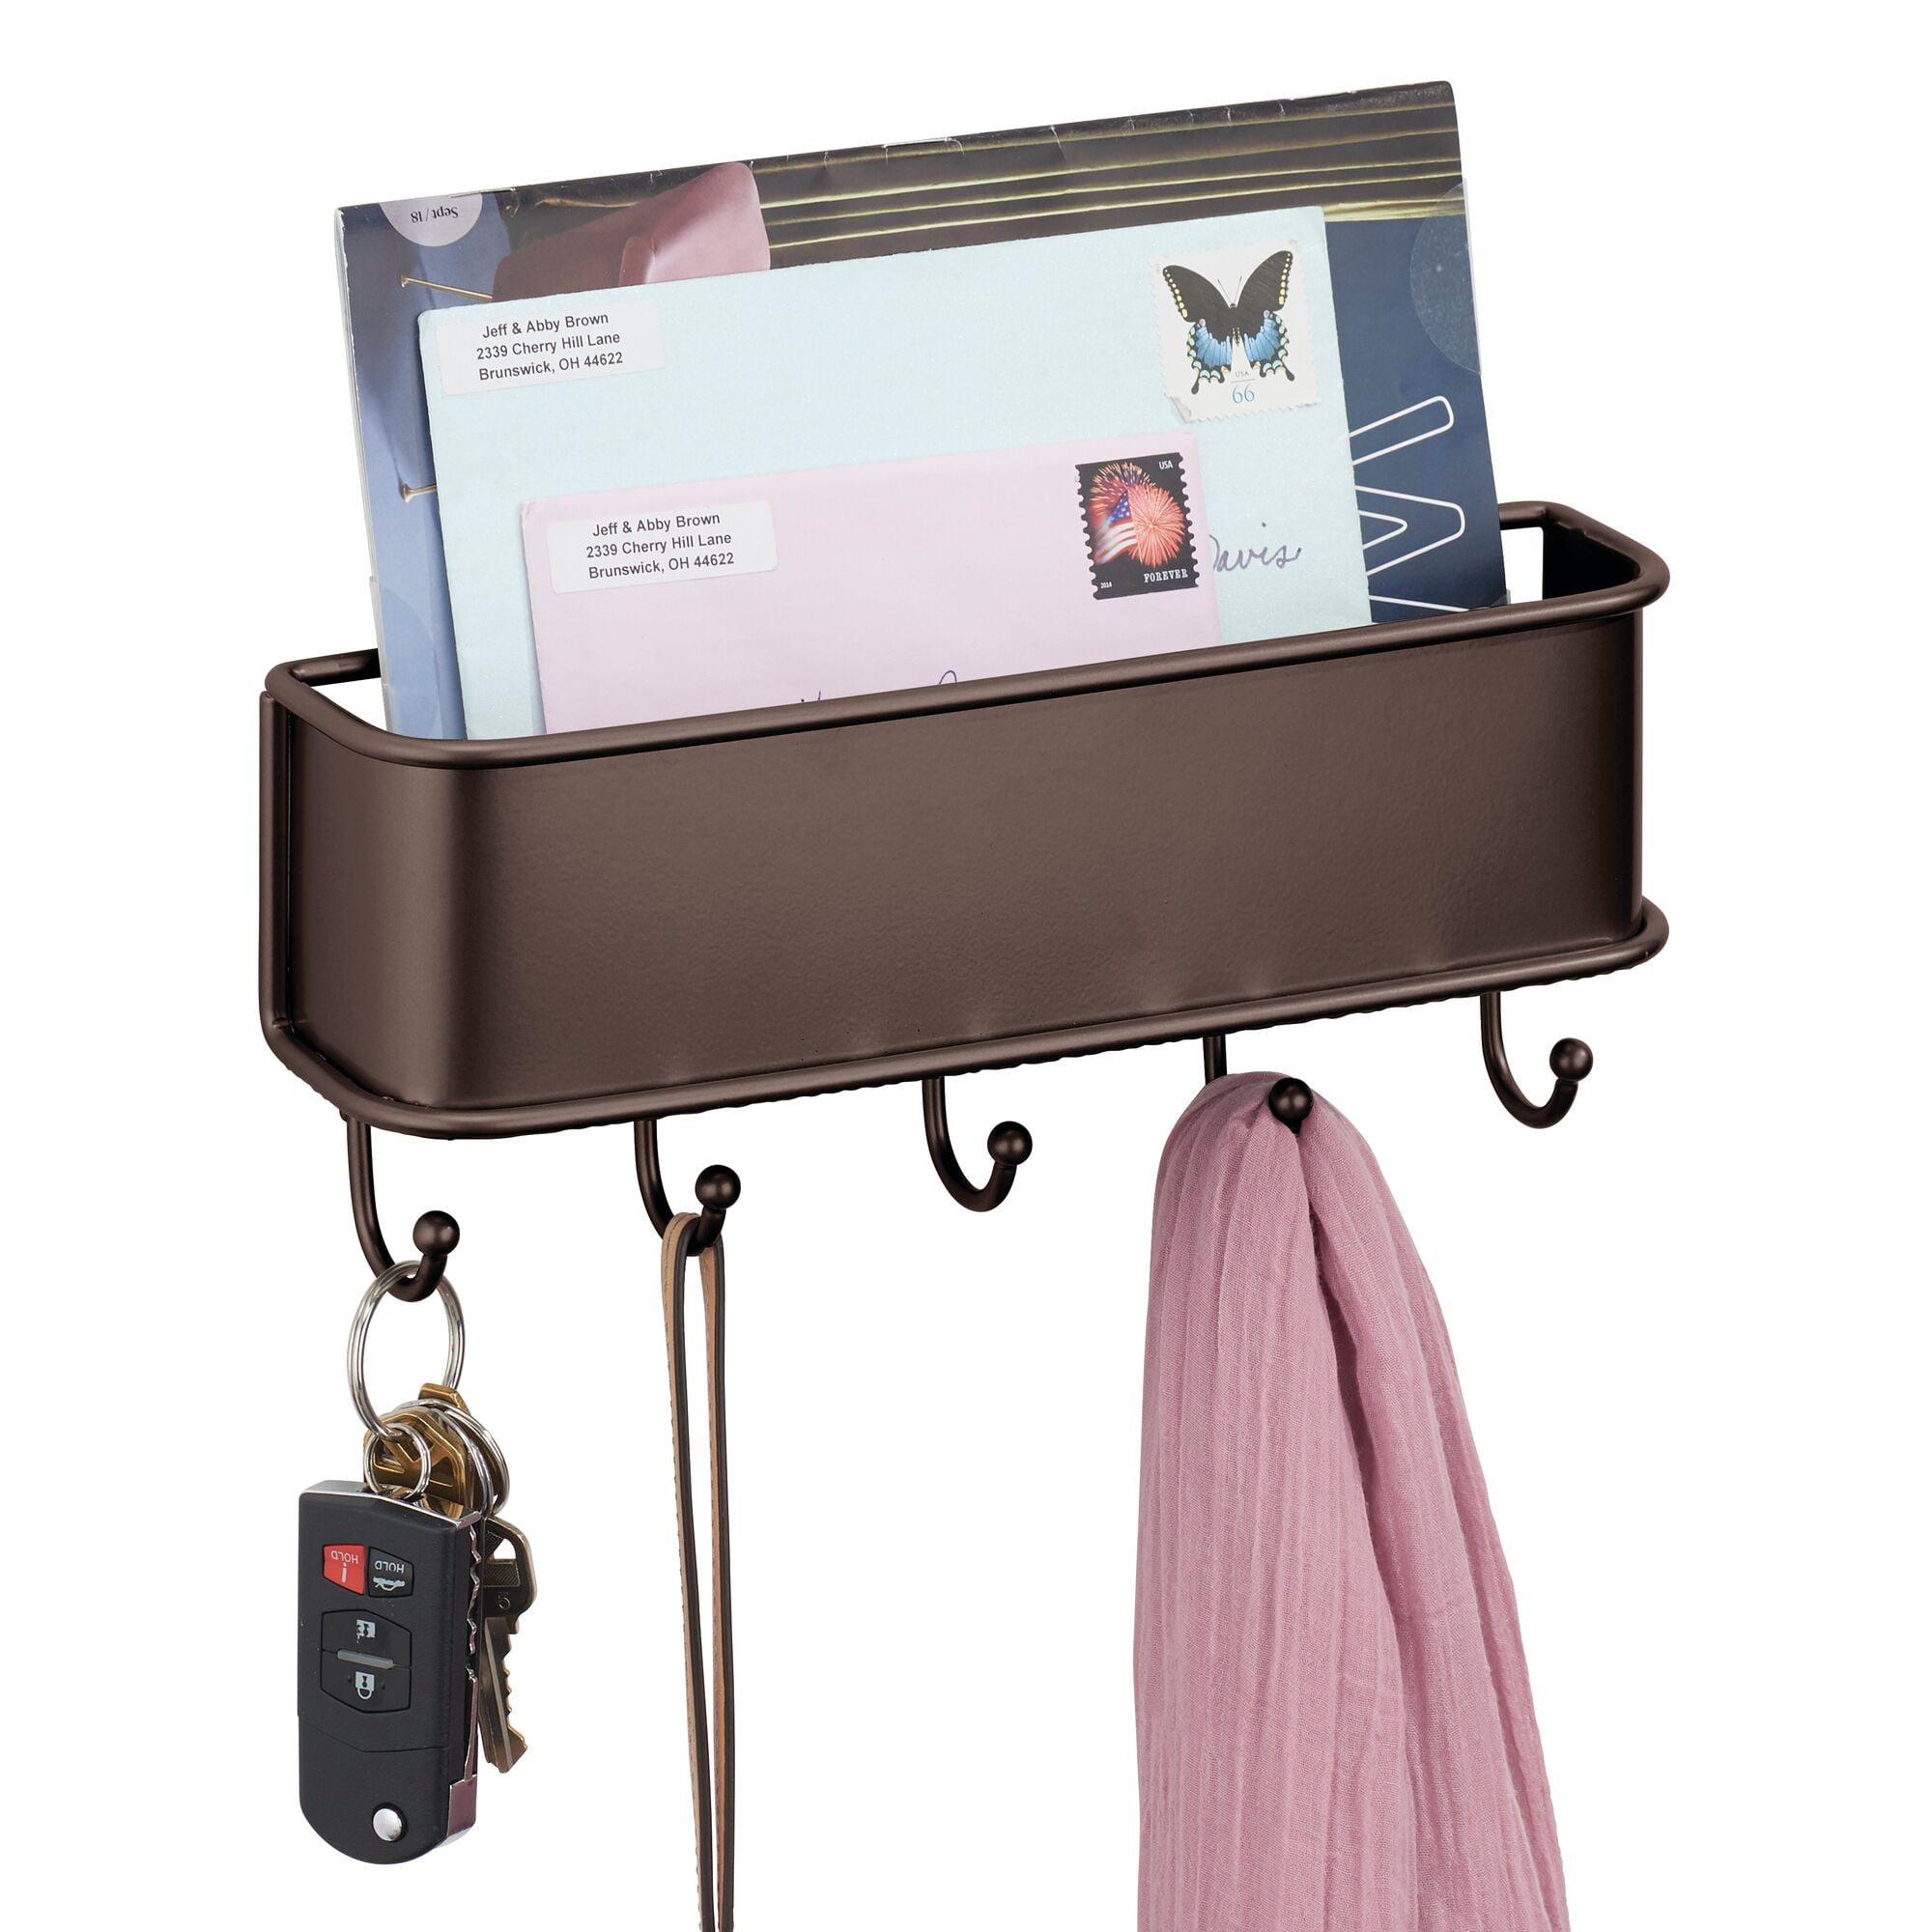 Home Office Organization Mudroom Decorative Wall Mounted Key Rack Pocket and Letter Sorter Holder for Entryway iDesign Twillo Mail 10.5 x 2.5 x 4.5 Bronze Kitchen 